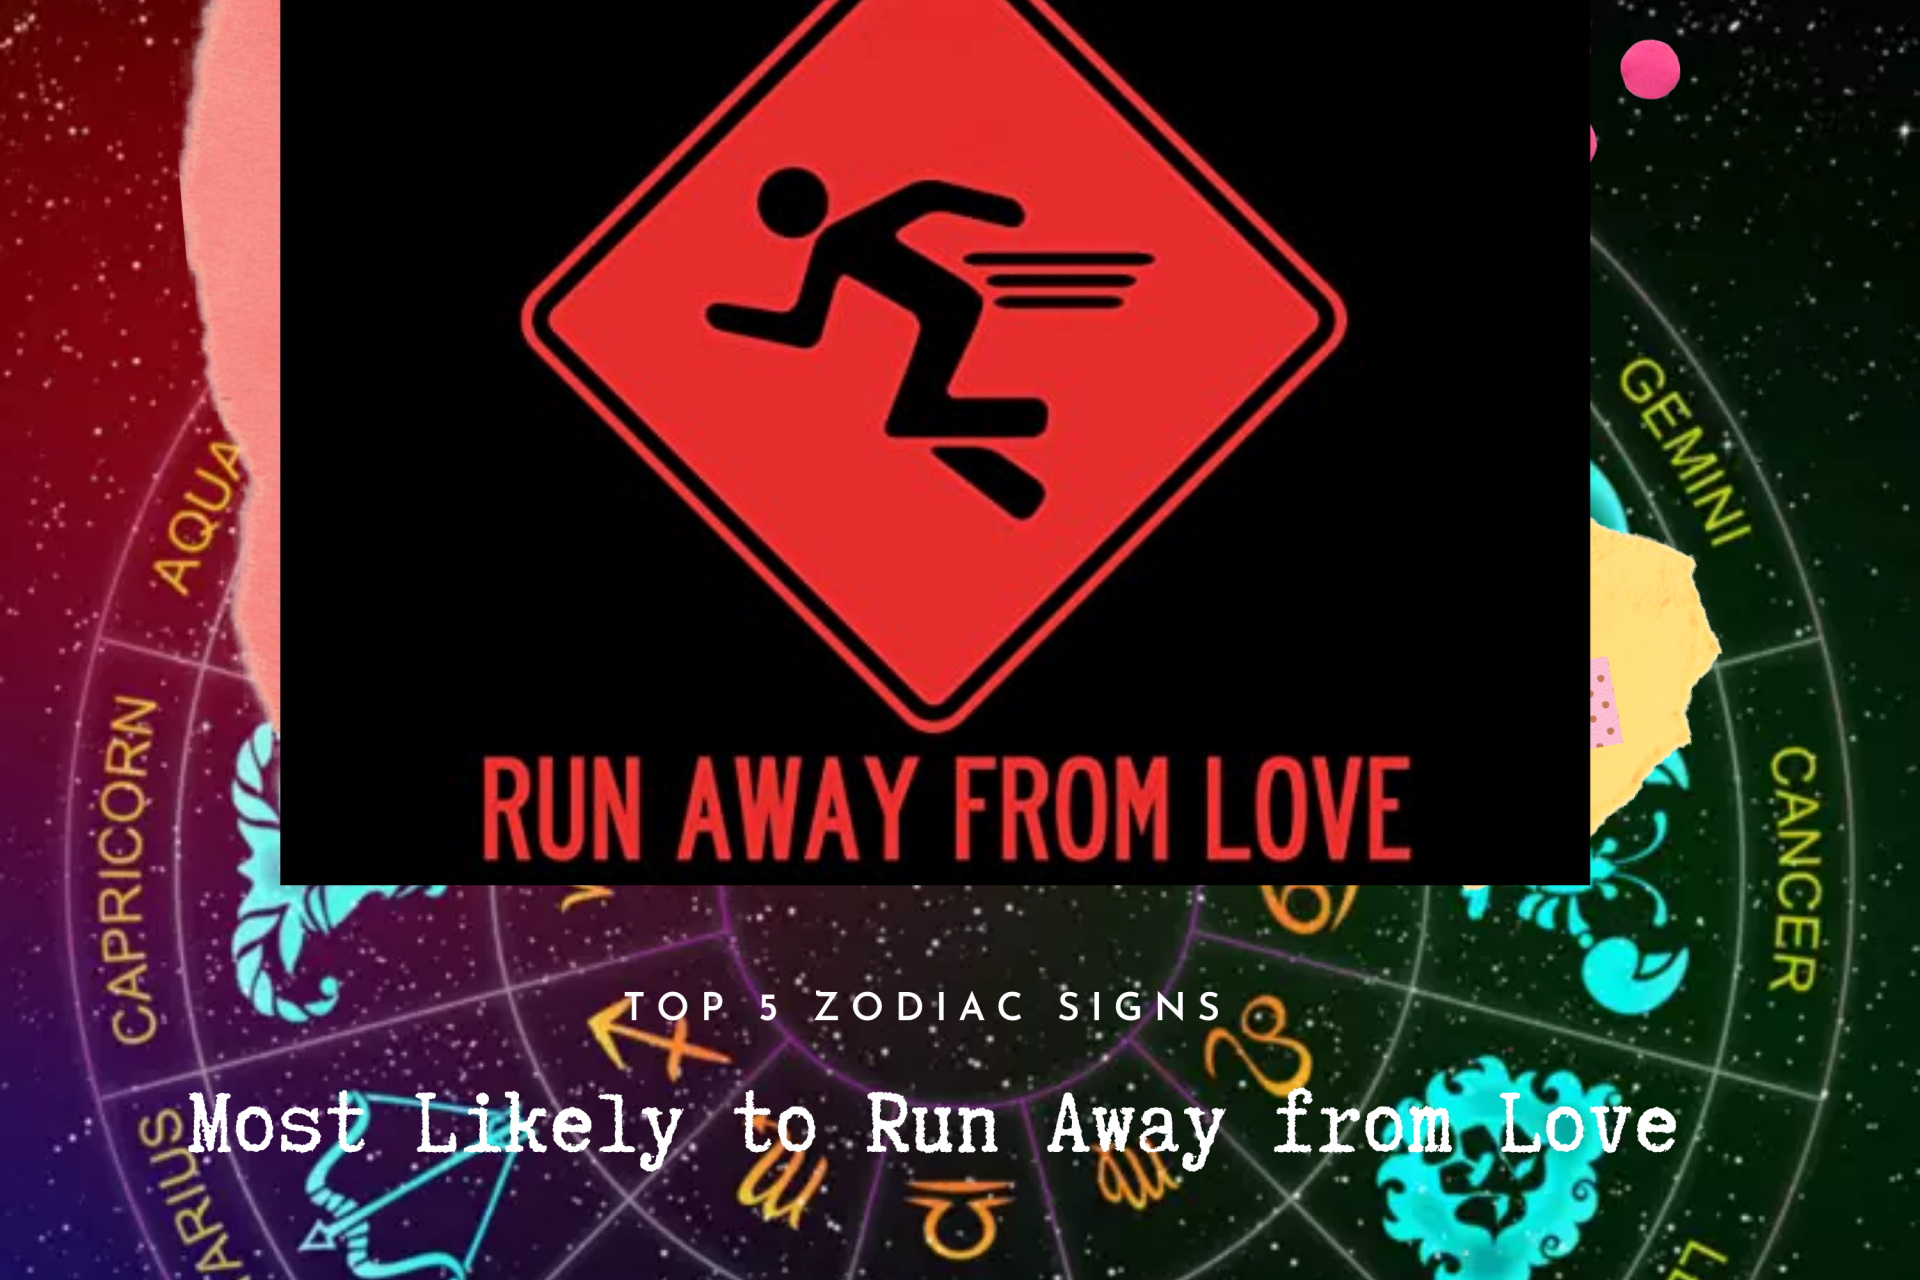 Top 5 Zodiac Signs Most Likely to Run Away from Love